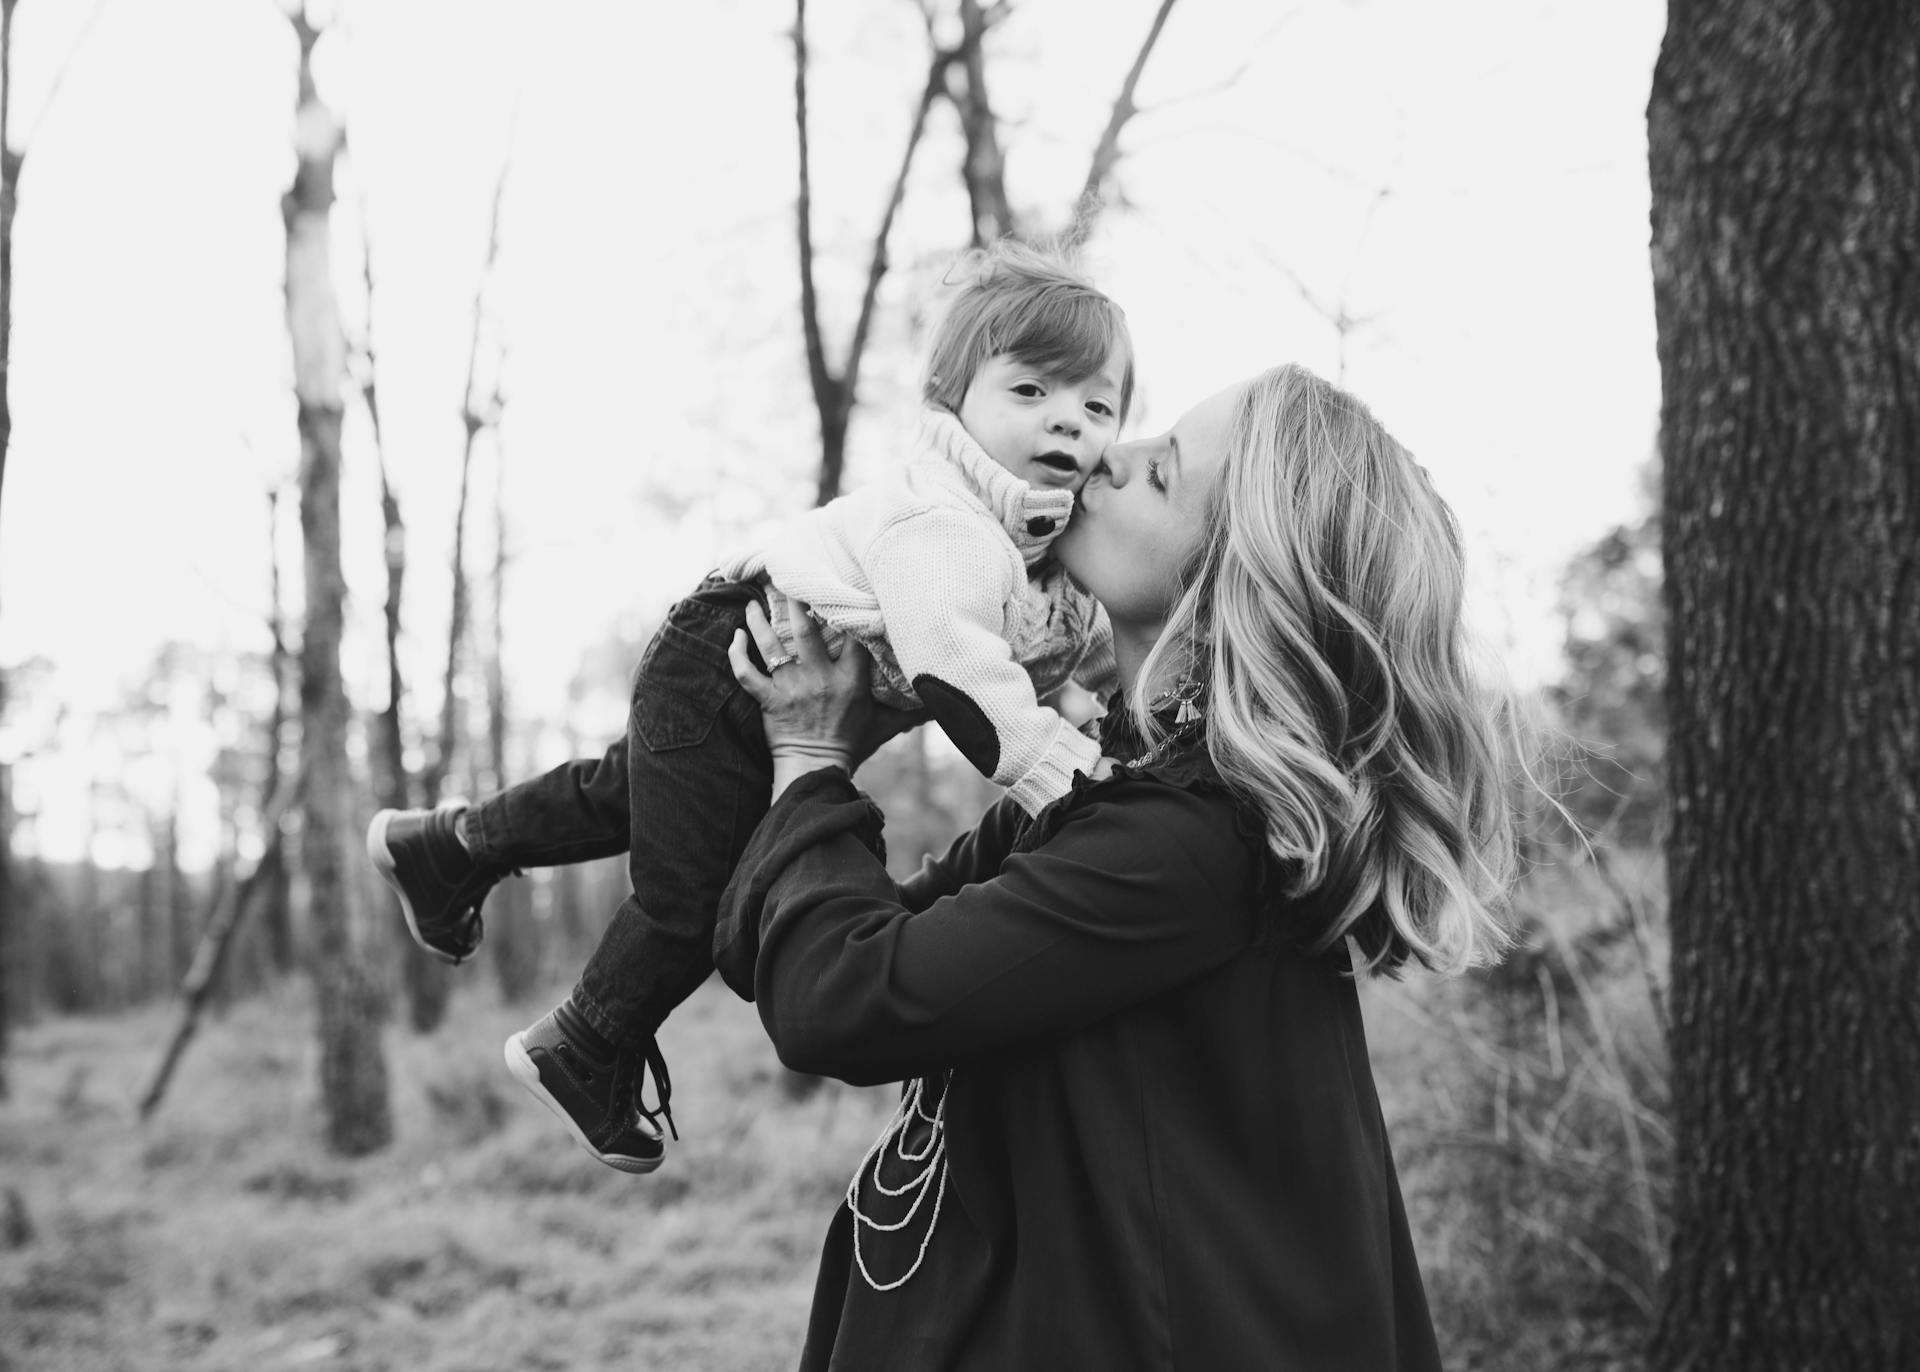 A woman kissing her child | Source: Pexels